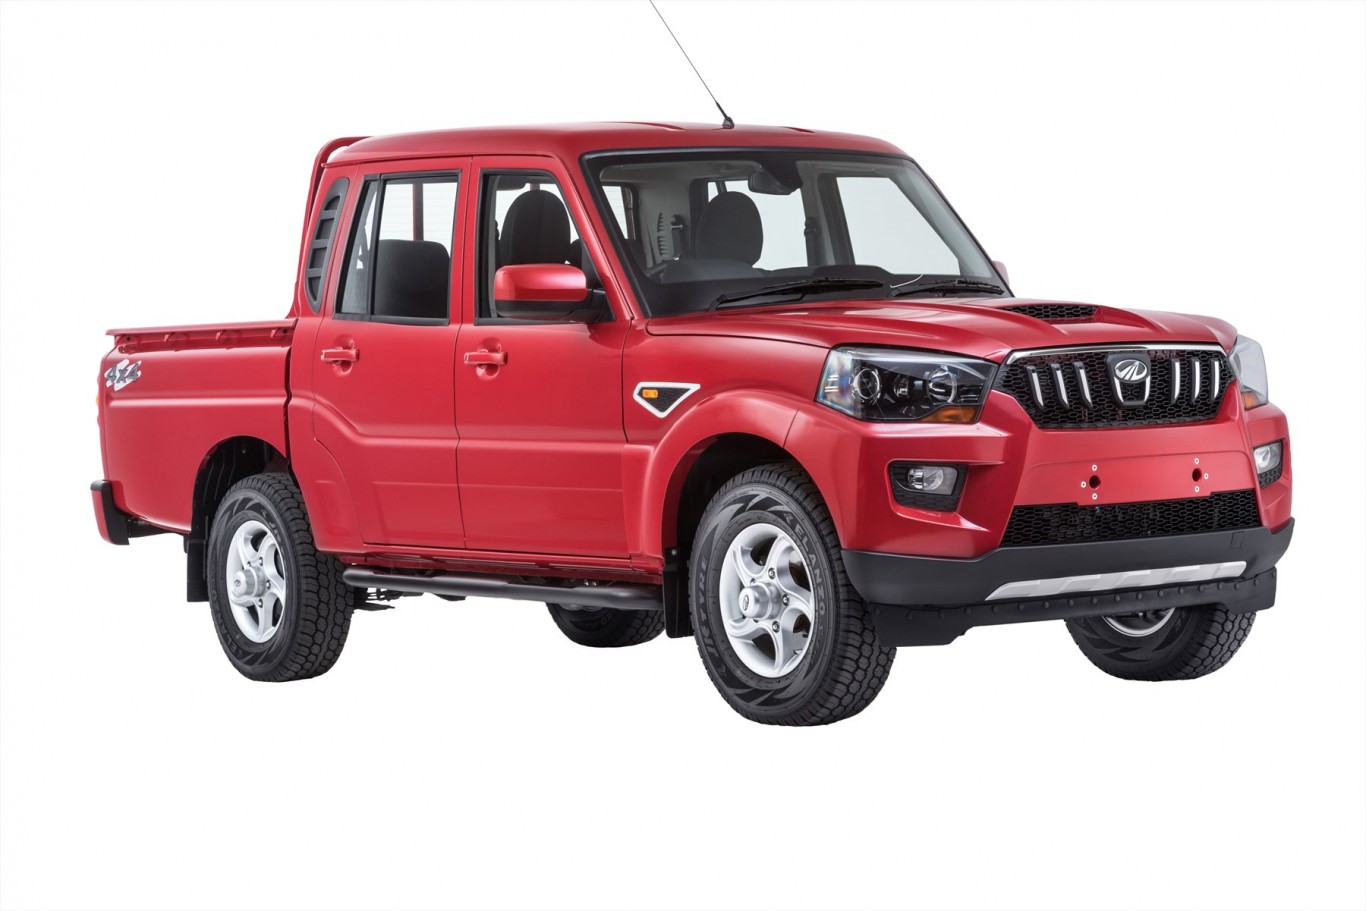 Mahindra launches Next Generation Pik Up in South Africa